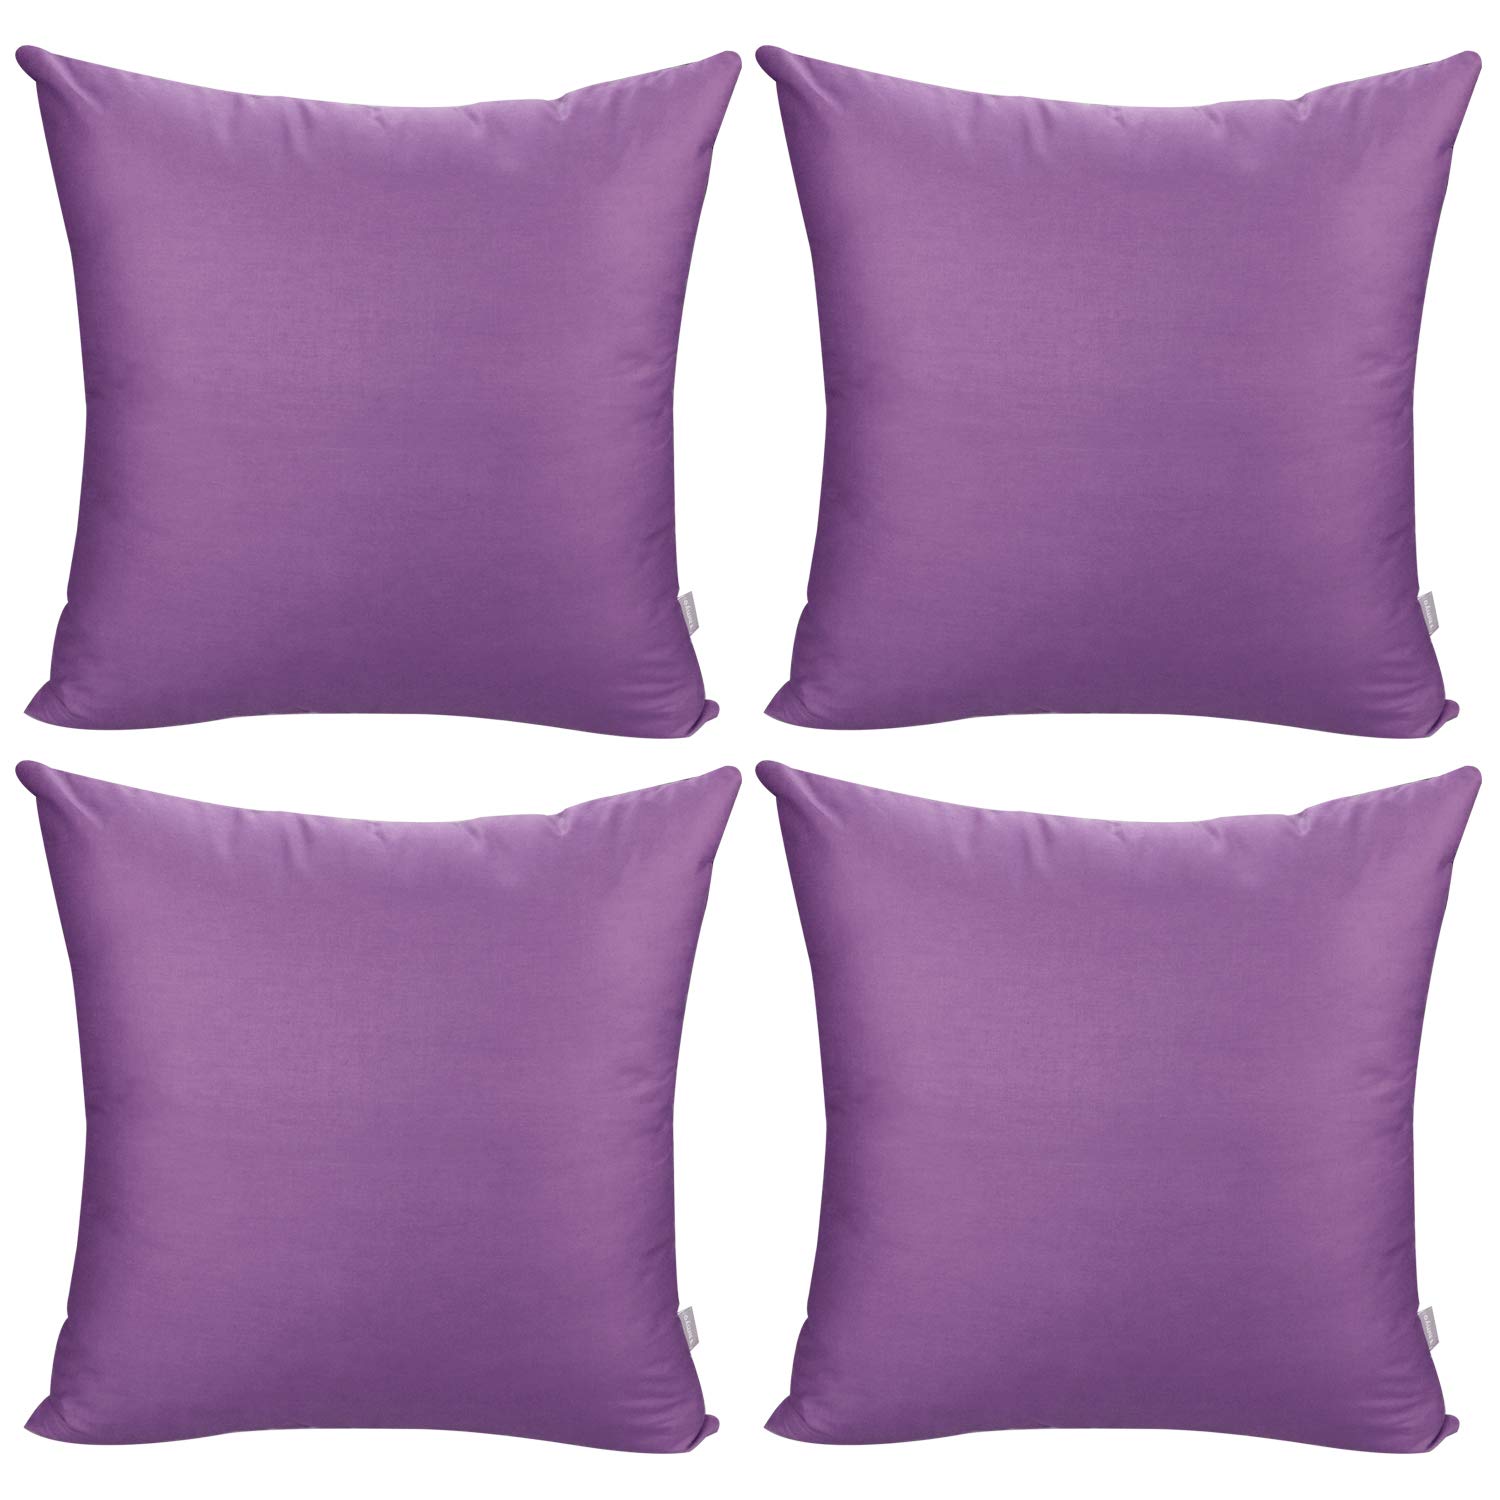 Thmyo 4-Pack 100% Cotton Comfortable Solid Decorative Throw Pillow Case, Square Cushion Cover Pillowcase Sublimation Blank Pillo